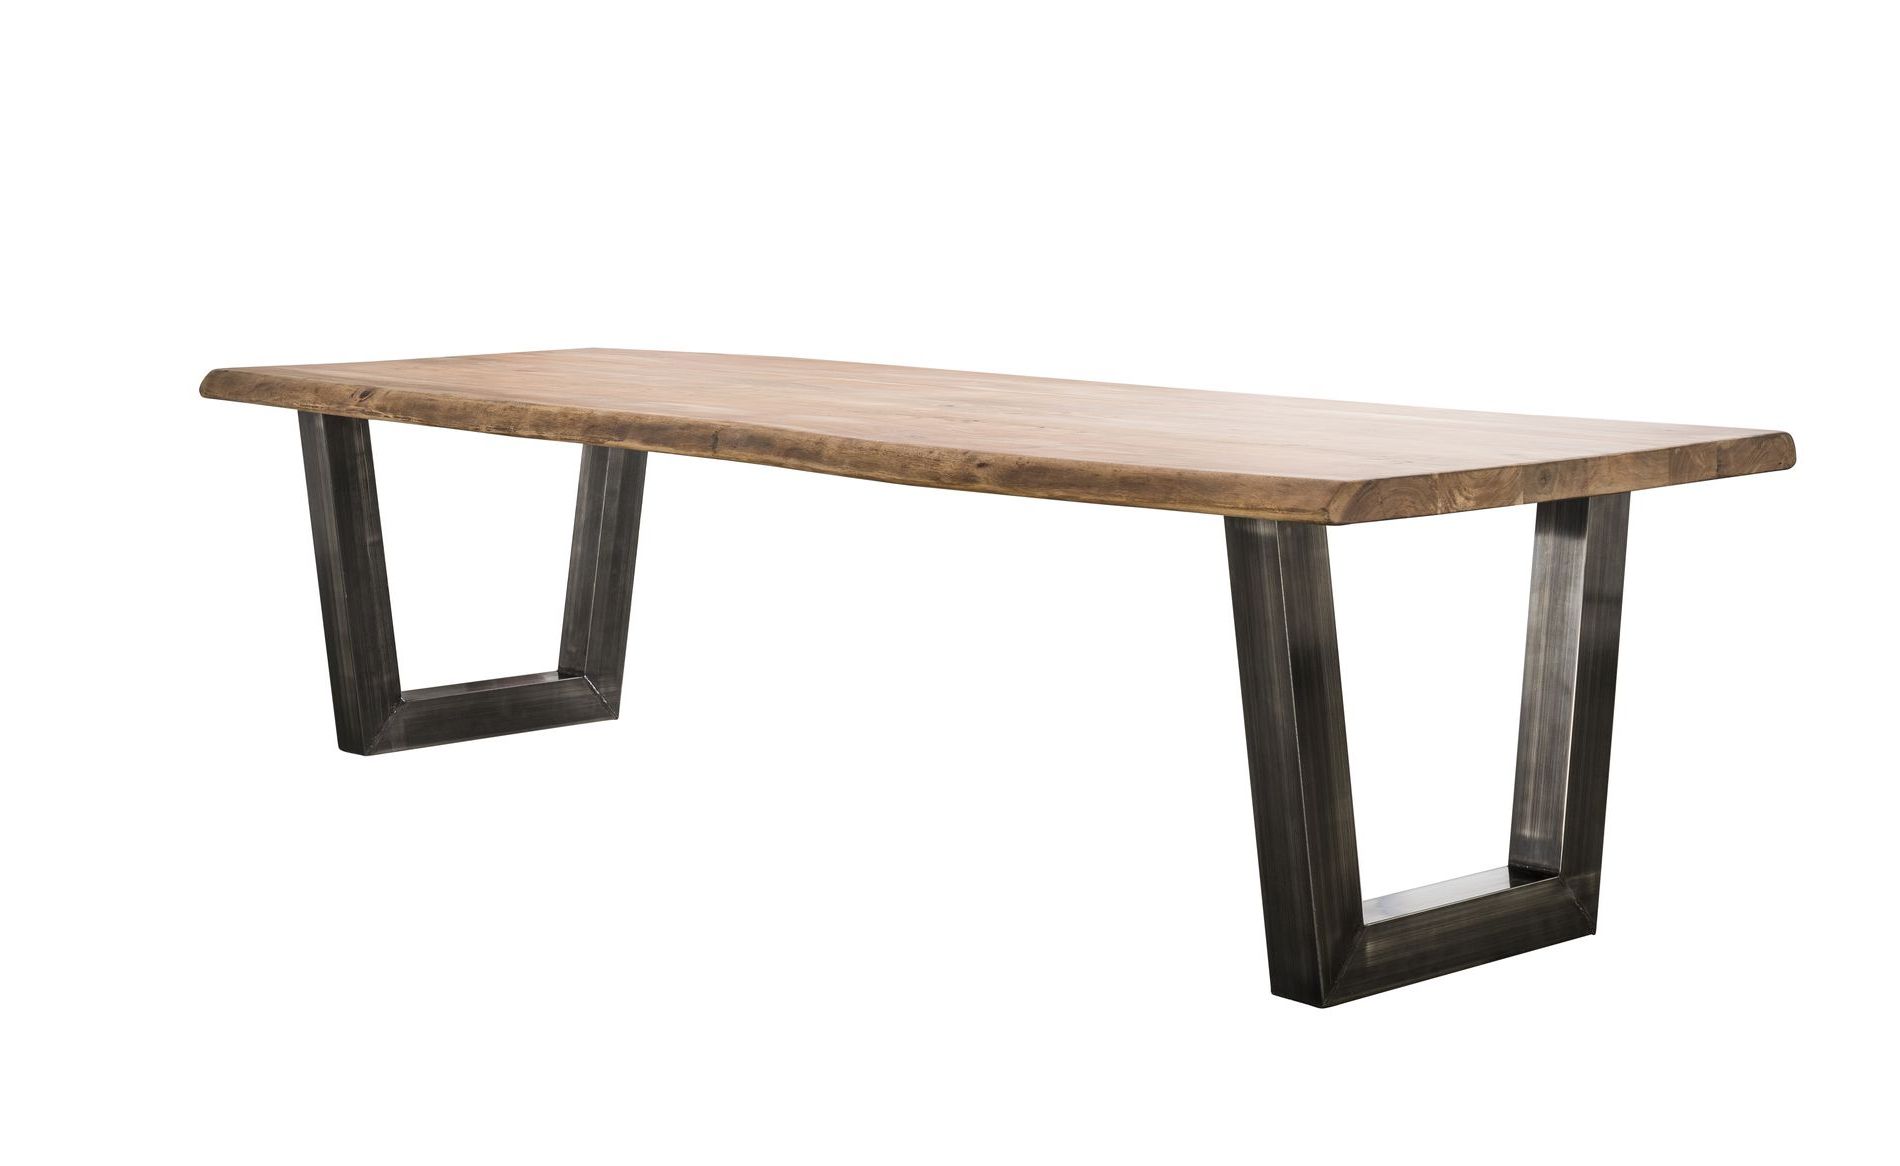 Favorite Dining Table 240cm Log In 60mm Thick Solid Acacia With Throughout Dining Tables With Brushed Stainless Steel Frame (View 19 of 25)